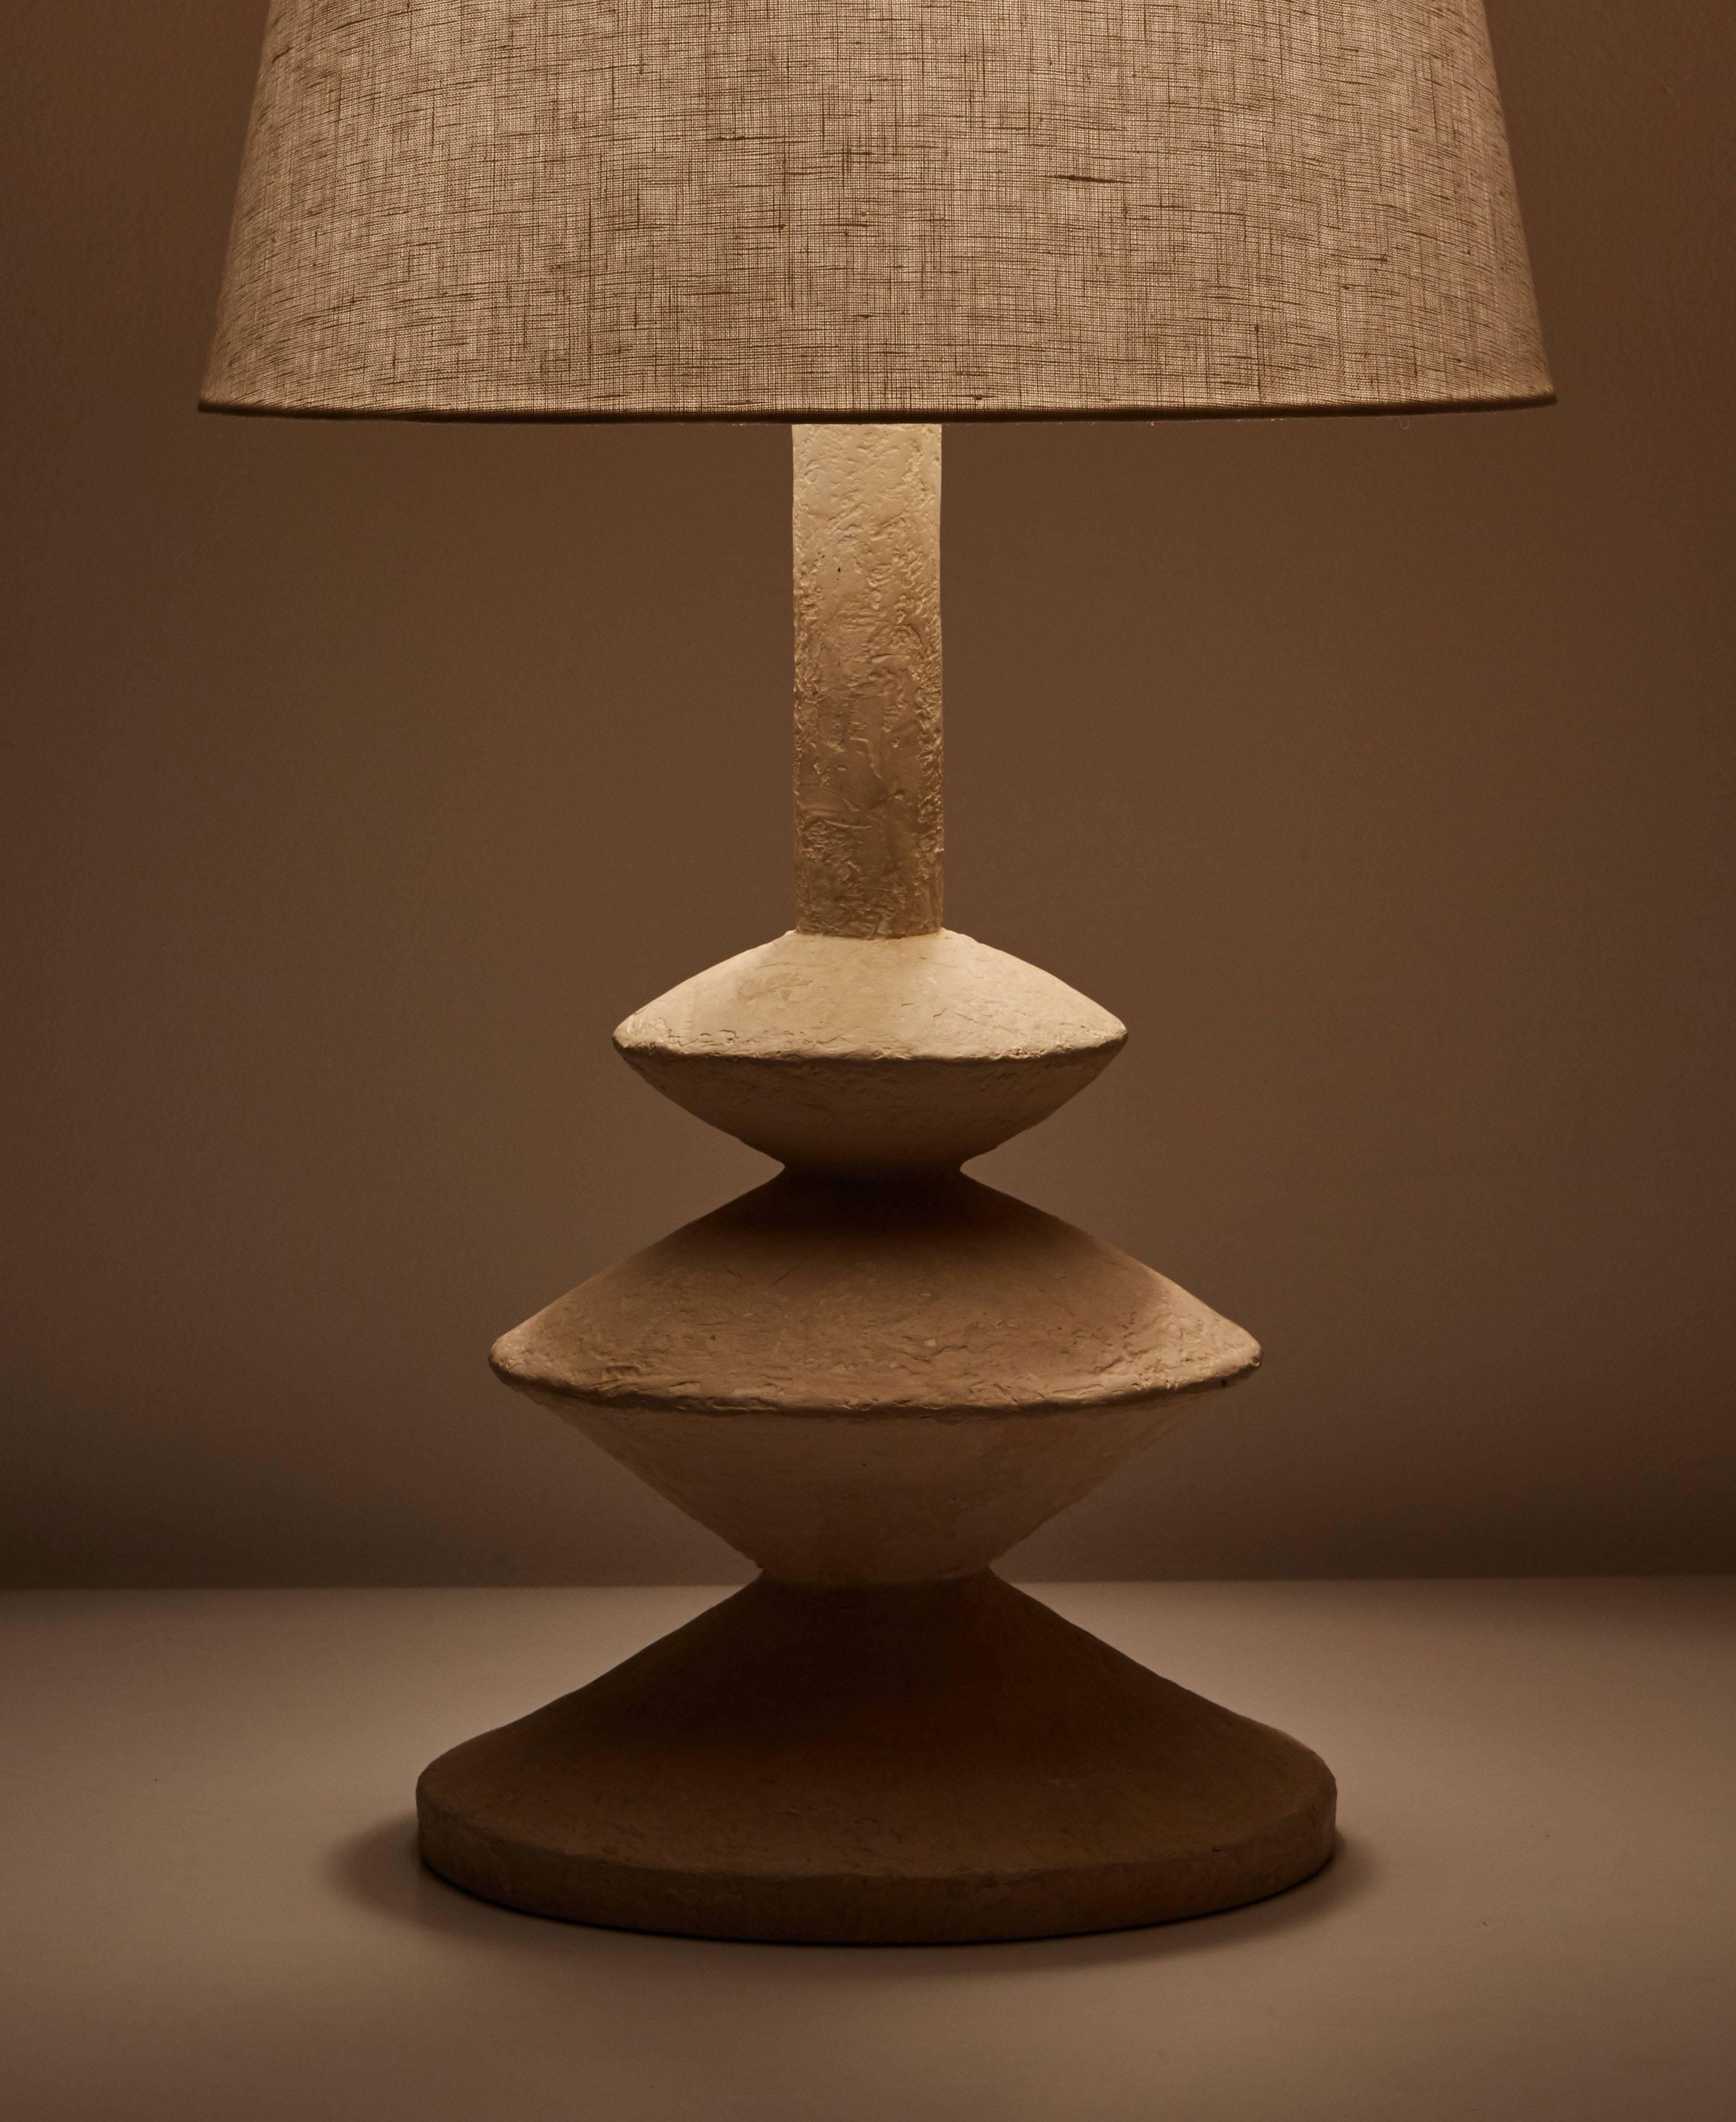 After Giacometti solid plaster table lamp, 1970s. Original cord. Takes one E26 100w maximum bulb. Shade not included. Custom shade fabrication available.